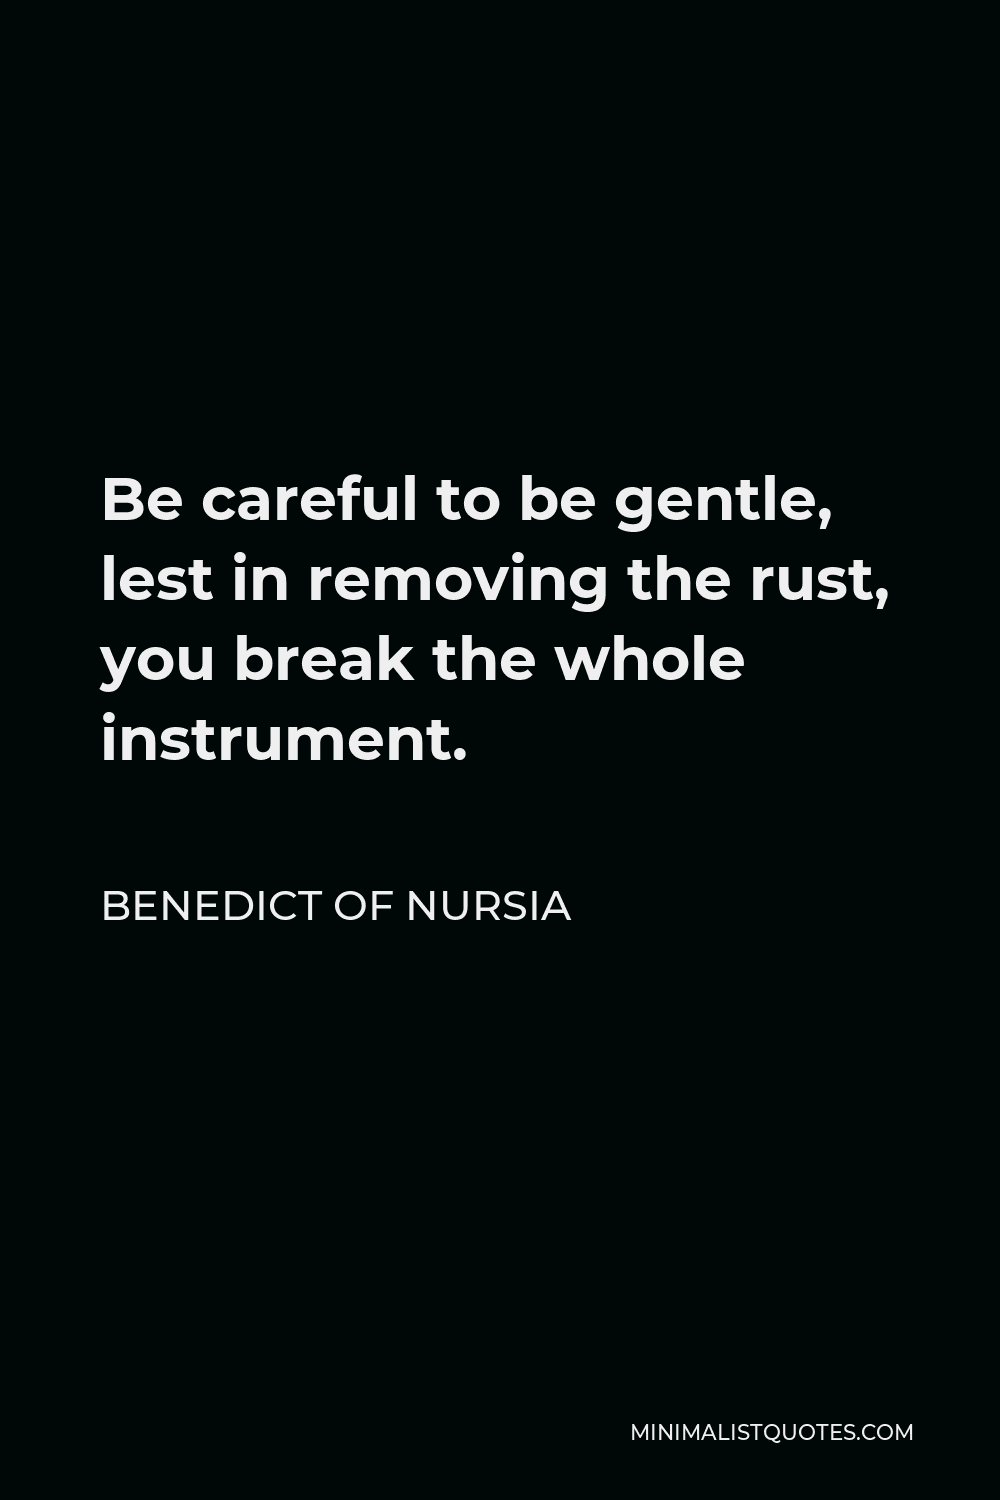 Benedict of Nursia Quote - Be careful to be gentle, lest in removing the rust, you break the whole instrument.